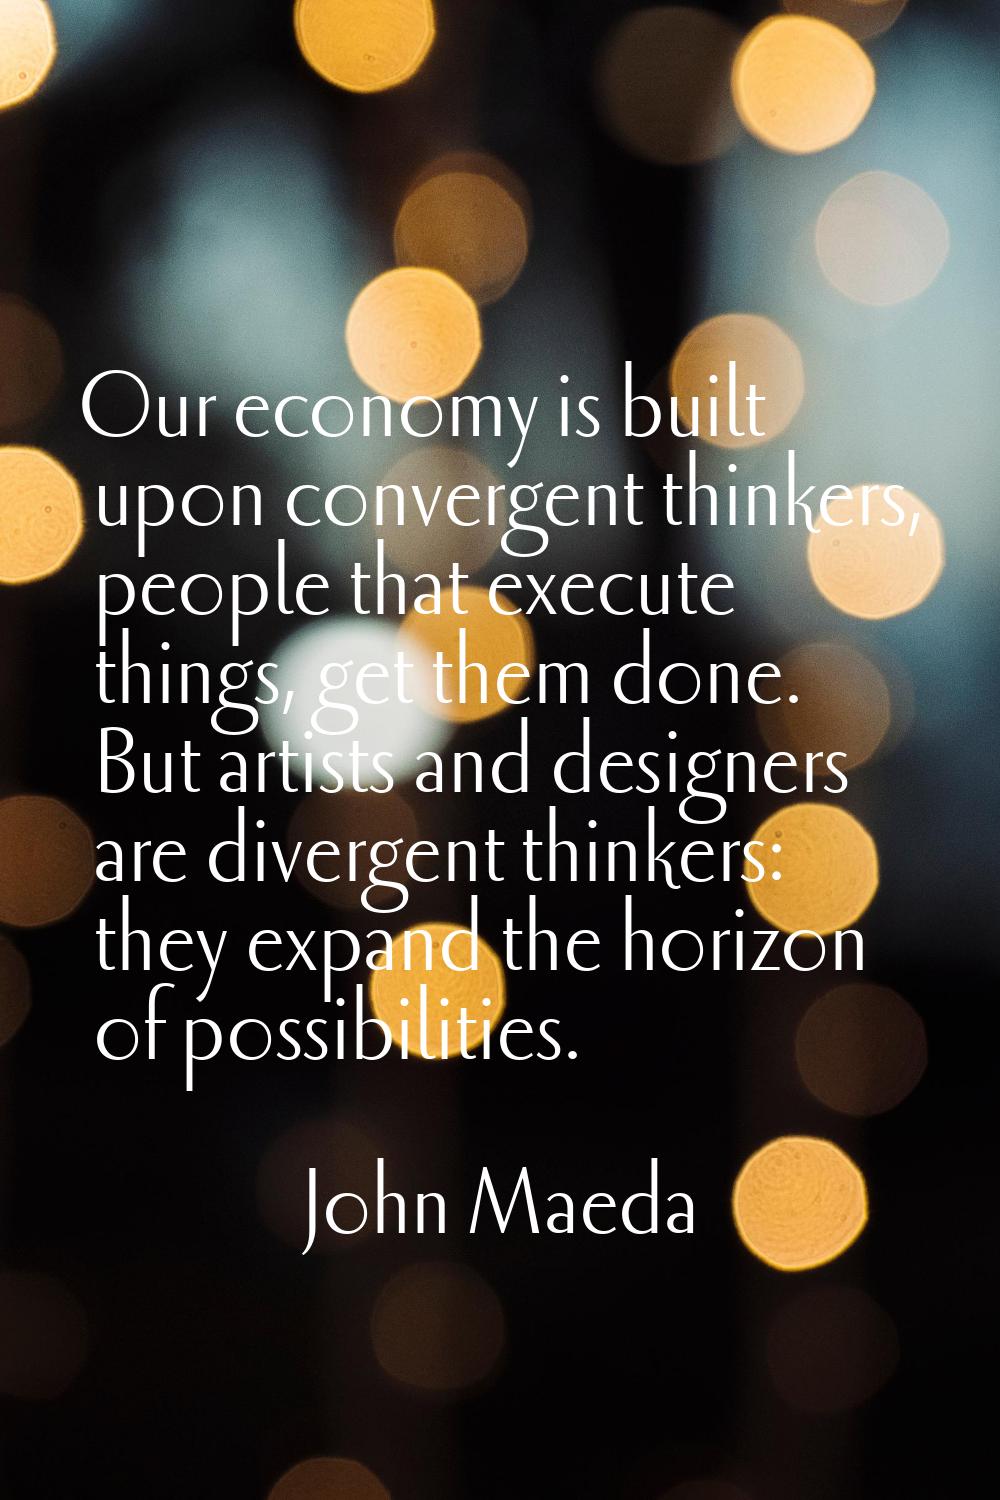 Our economy is built upon convergent thinkers, people that execute things, get them done. But artis